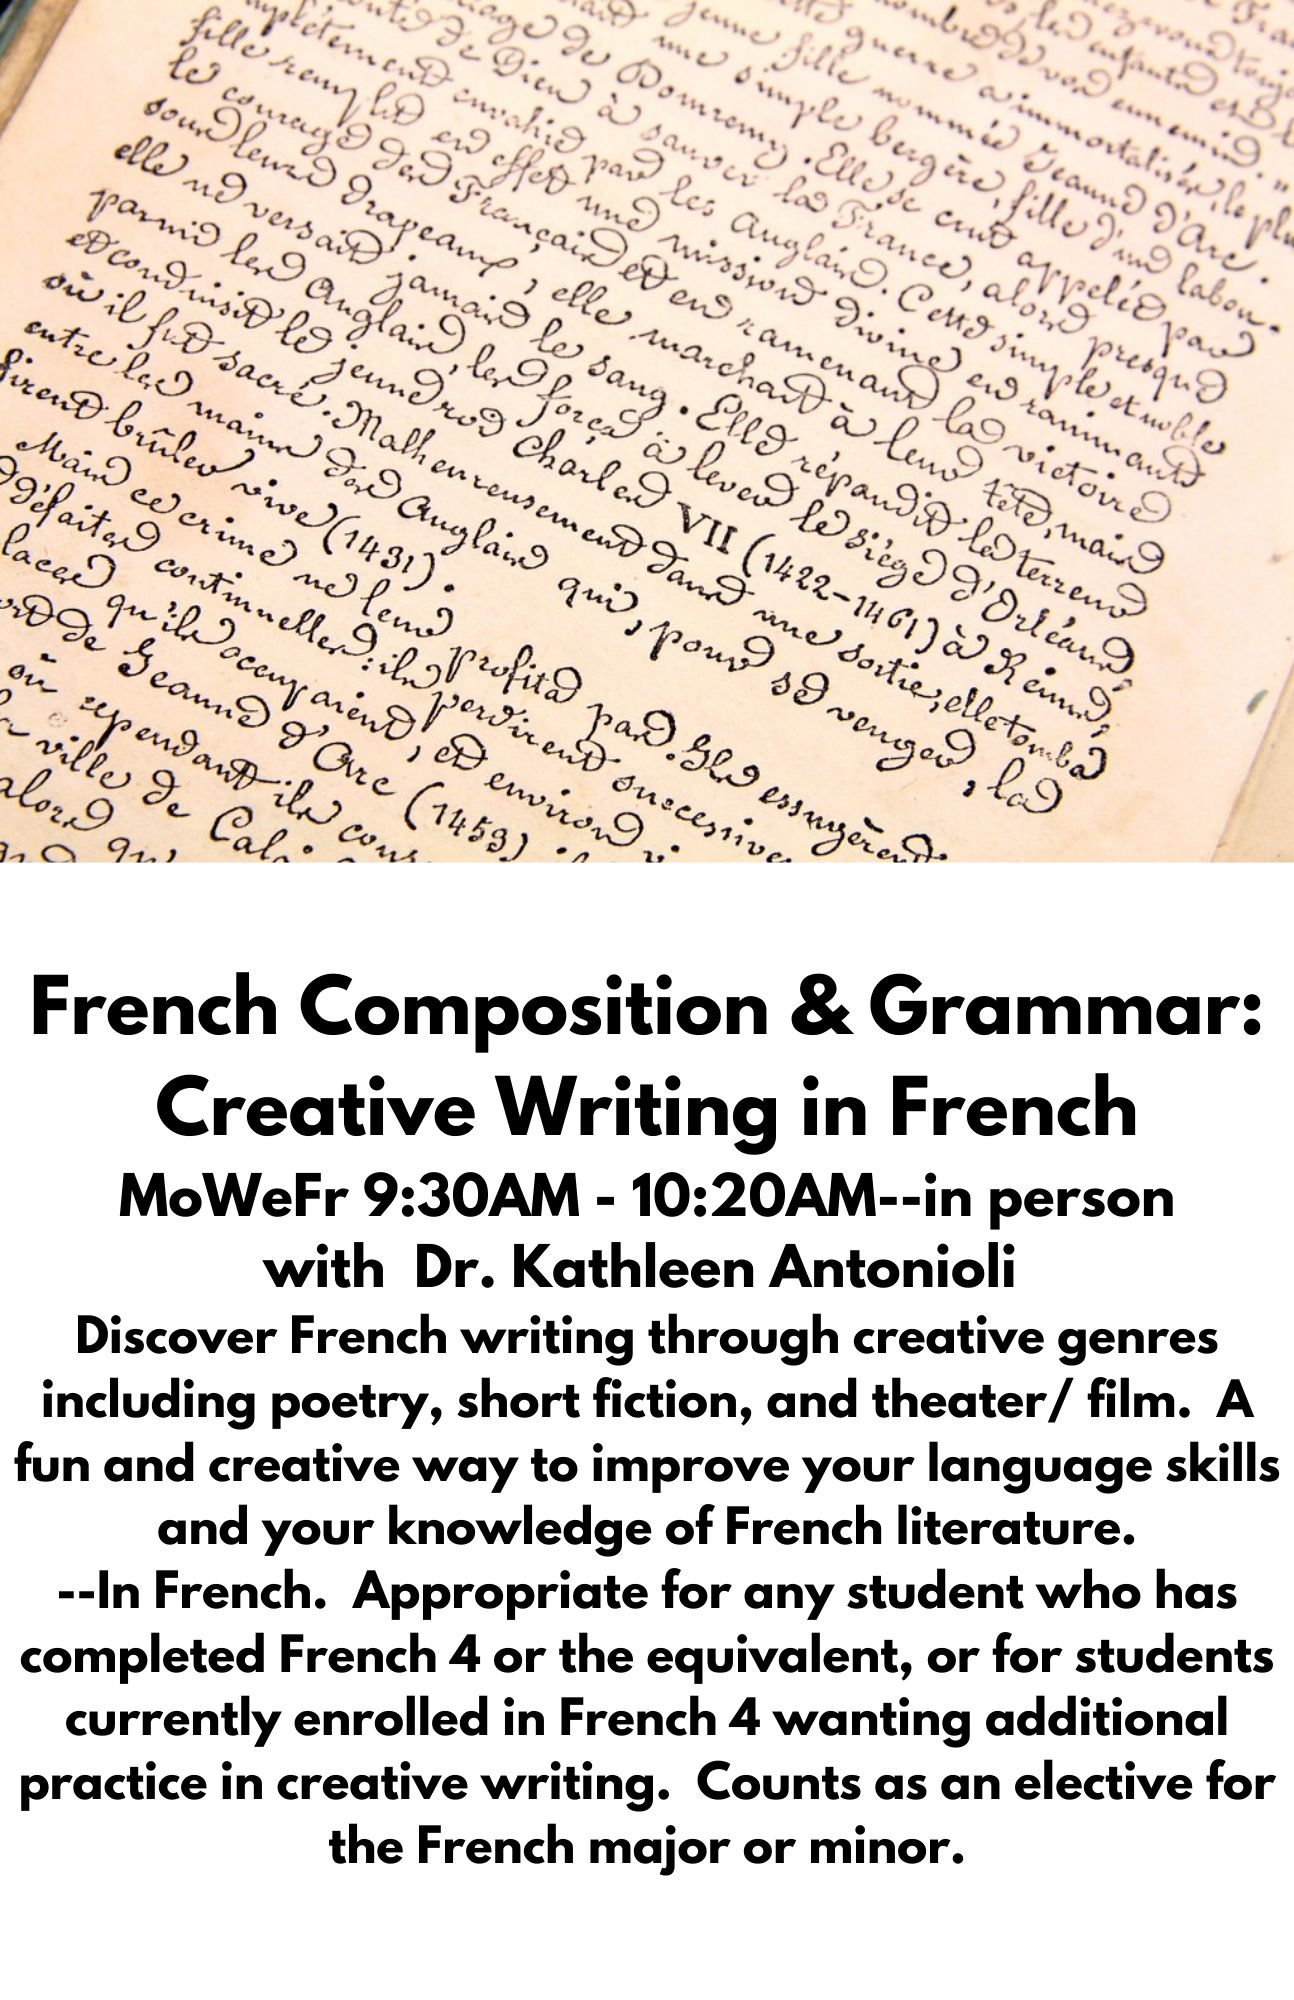 French Composition & Grammar: Creative Writing in French MoWeFr 9:30AM - 10:20AM--in person with  Dr. Kathleen Antonioli  Discover French writing through creative genres including poetry, short fiction, and theater/ film.  A fun and creative way to improve your language skills and your knowledge of French literature. --In French.  Appropriate for any student who has completed French 4 or the equivalent, or for students currently enrolled in French 4 wanting additional practice in creative writing.  Counts as an elective for the French major or minor.